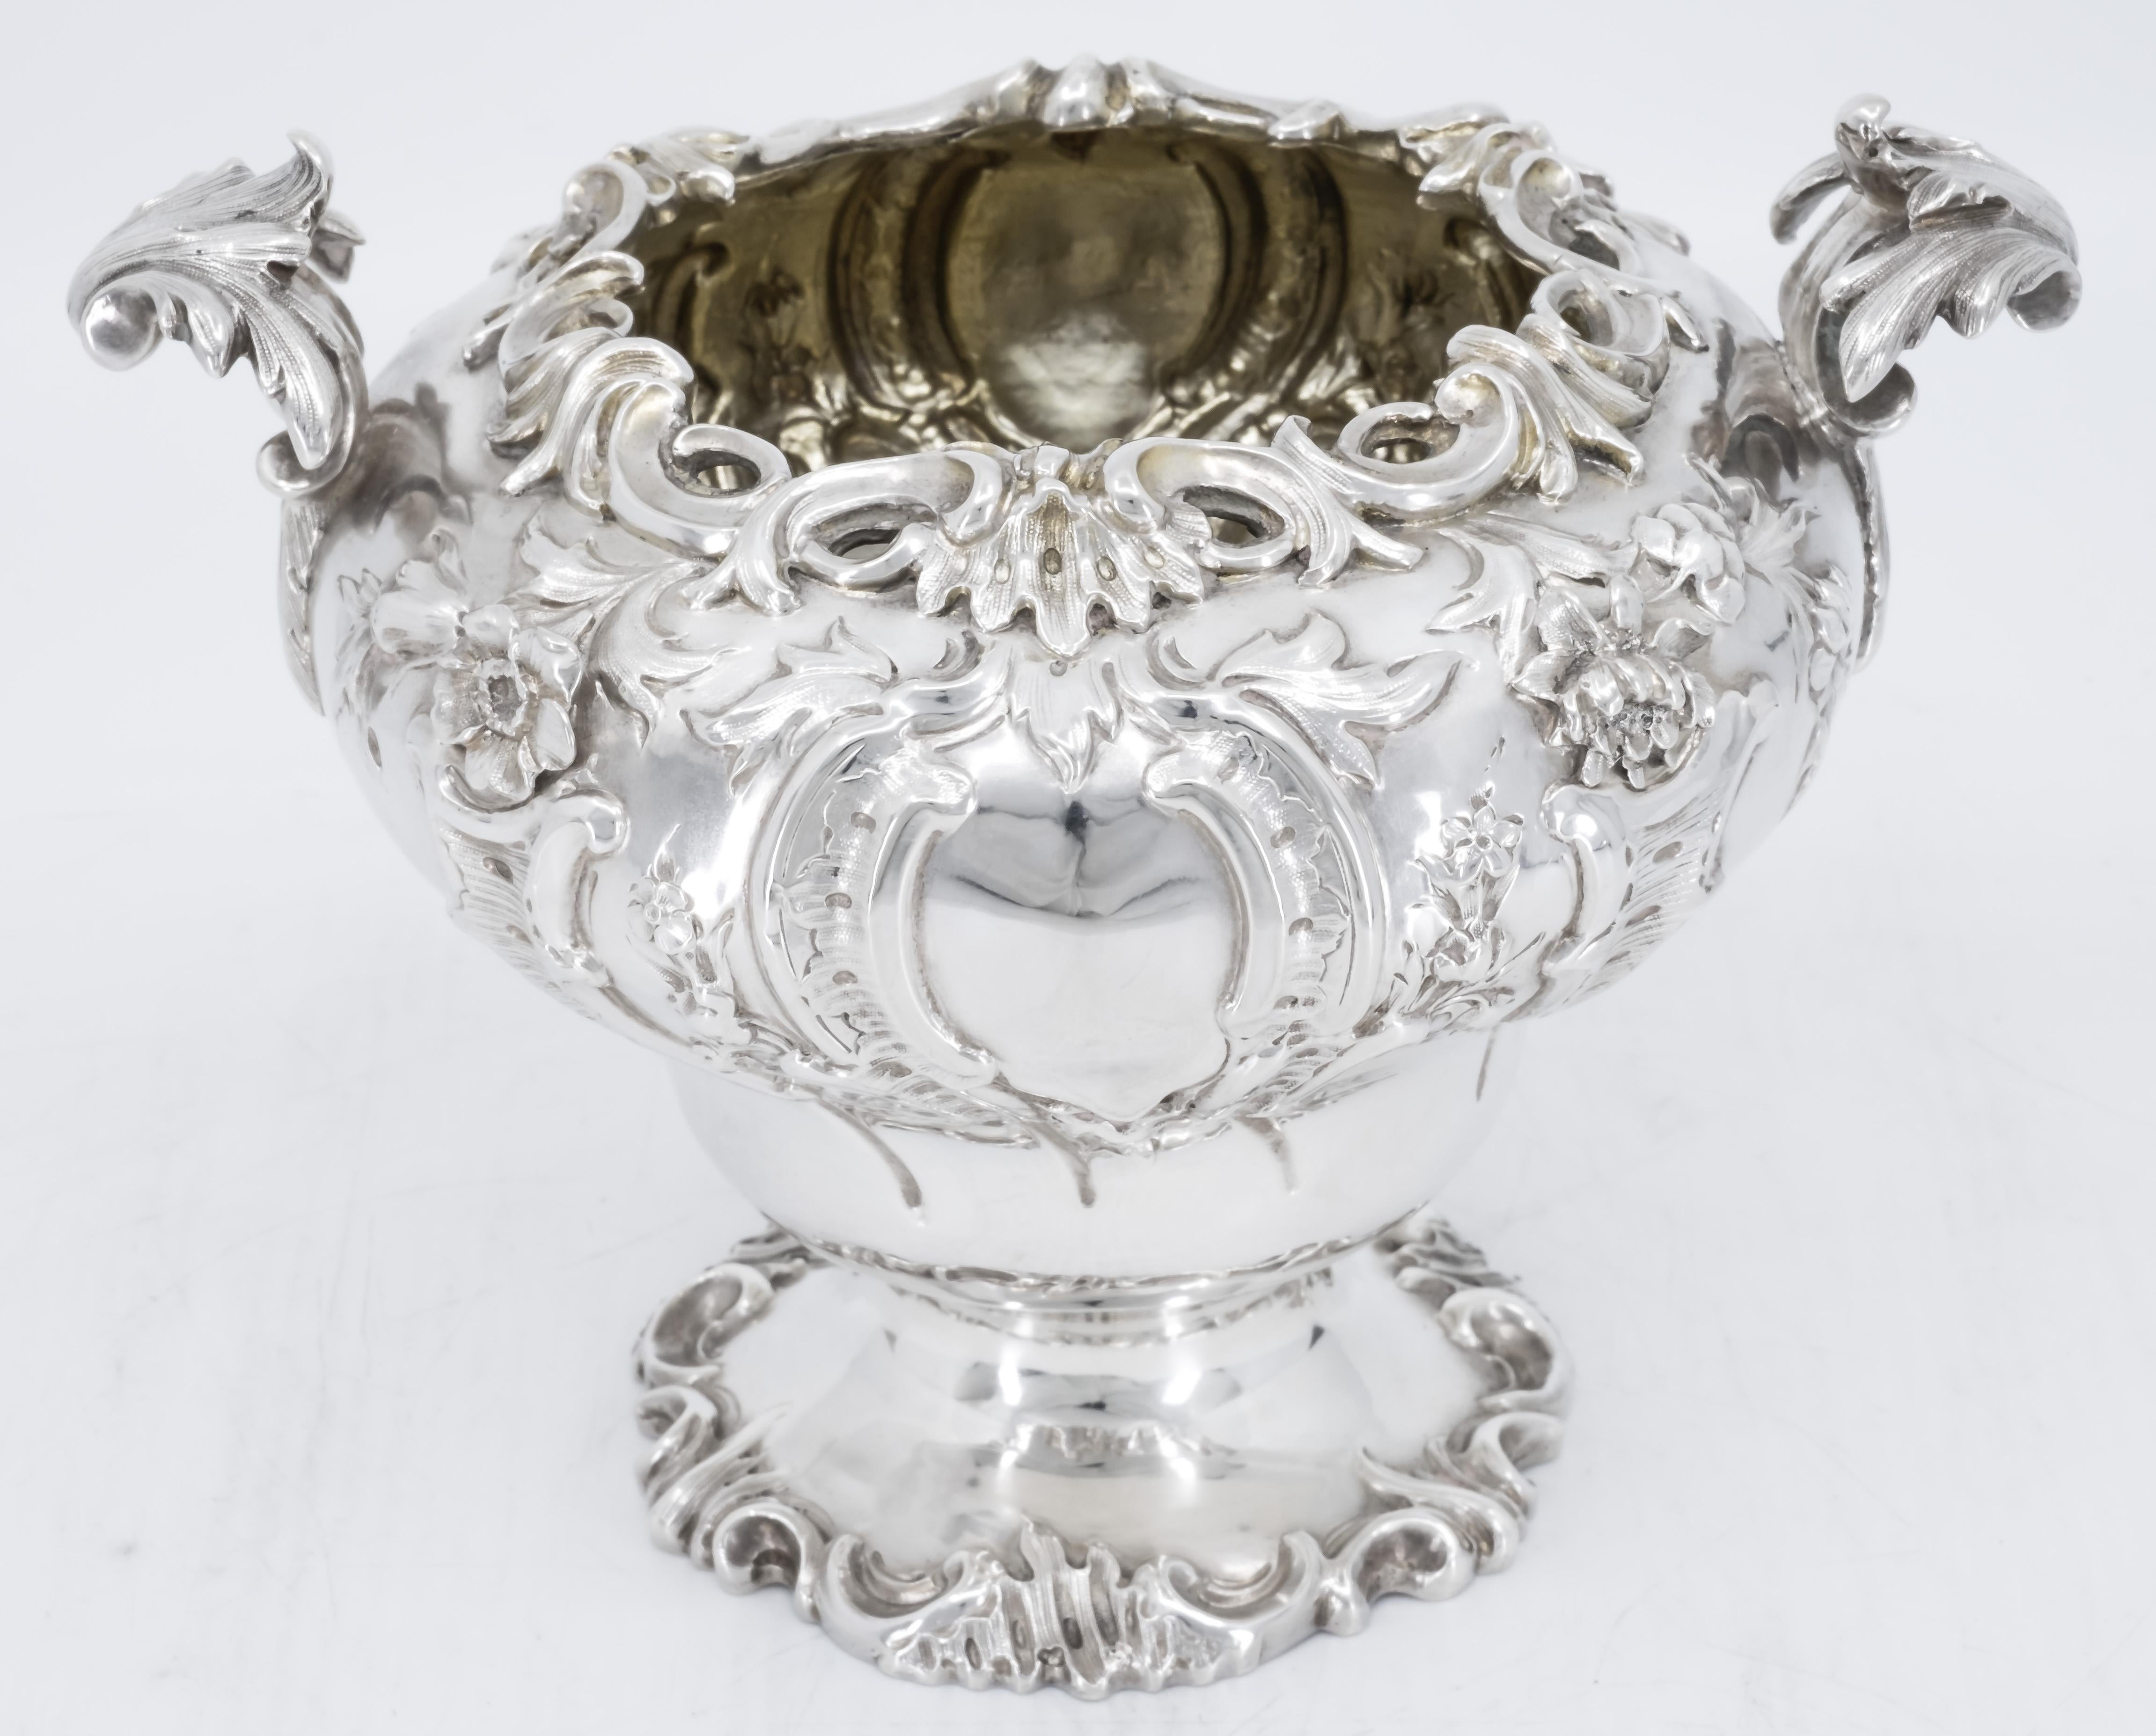 Tea Services in Rococo Style, London Sterling Sliver 925, Early 19th Century For Sale 1